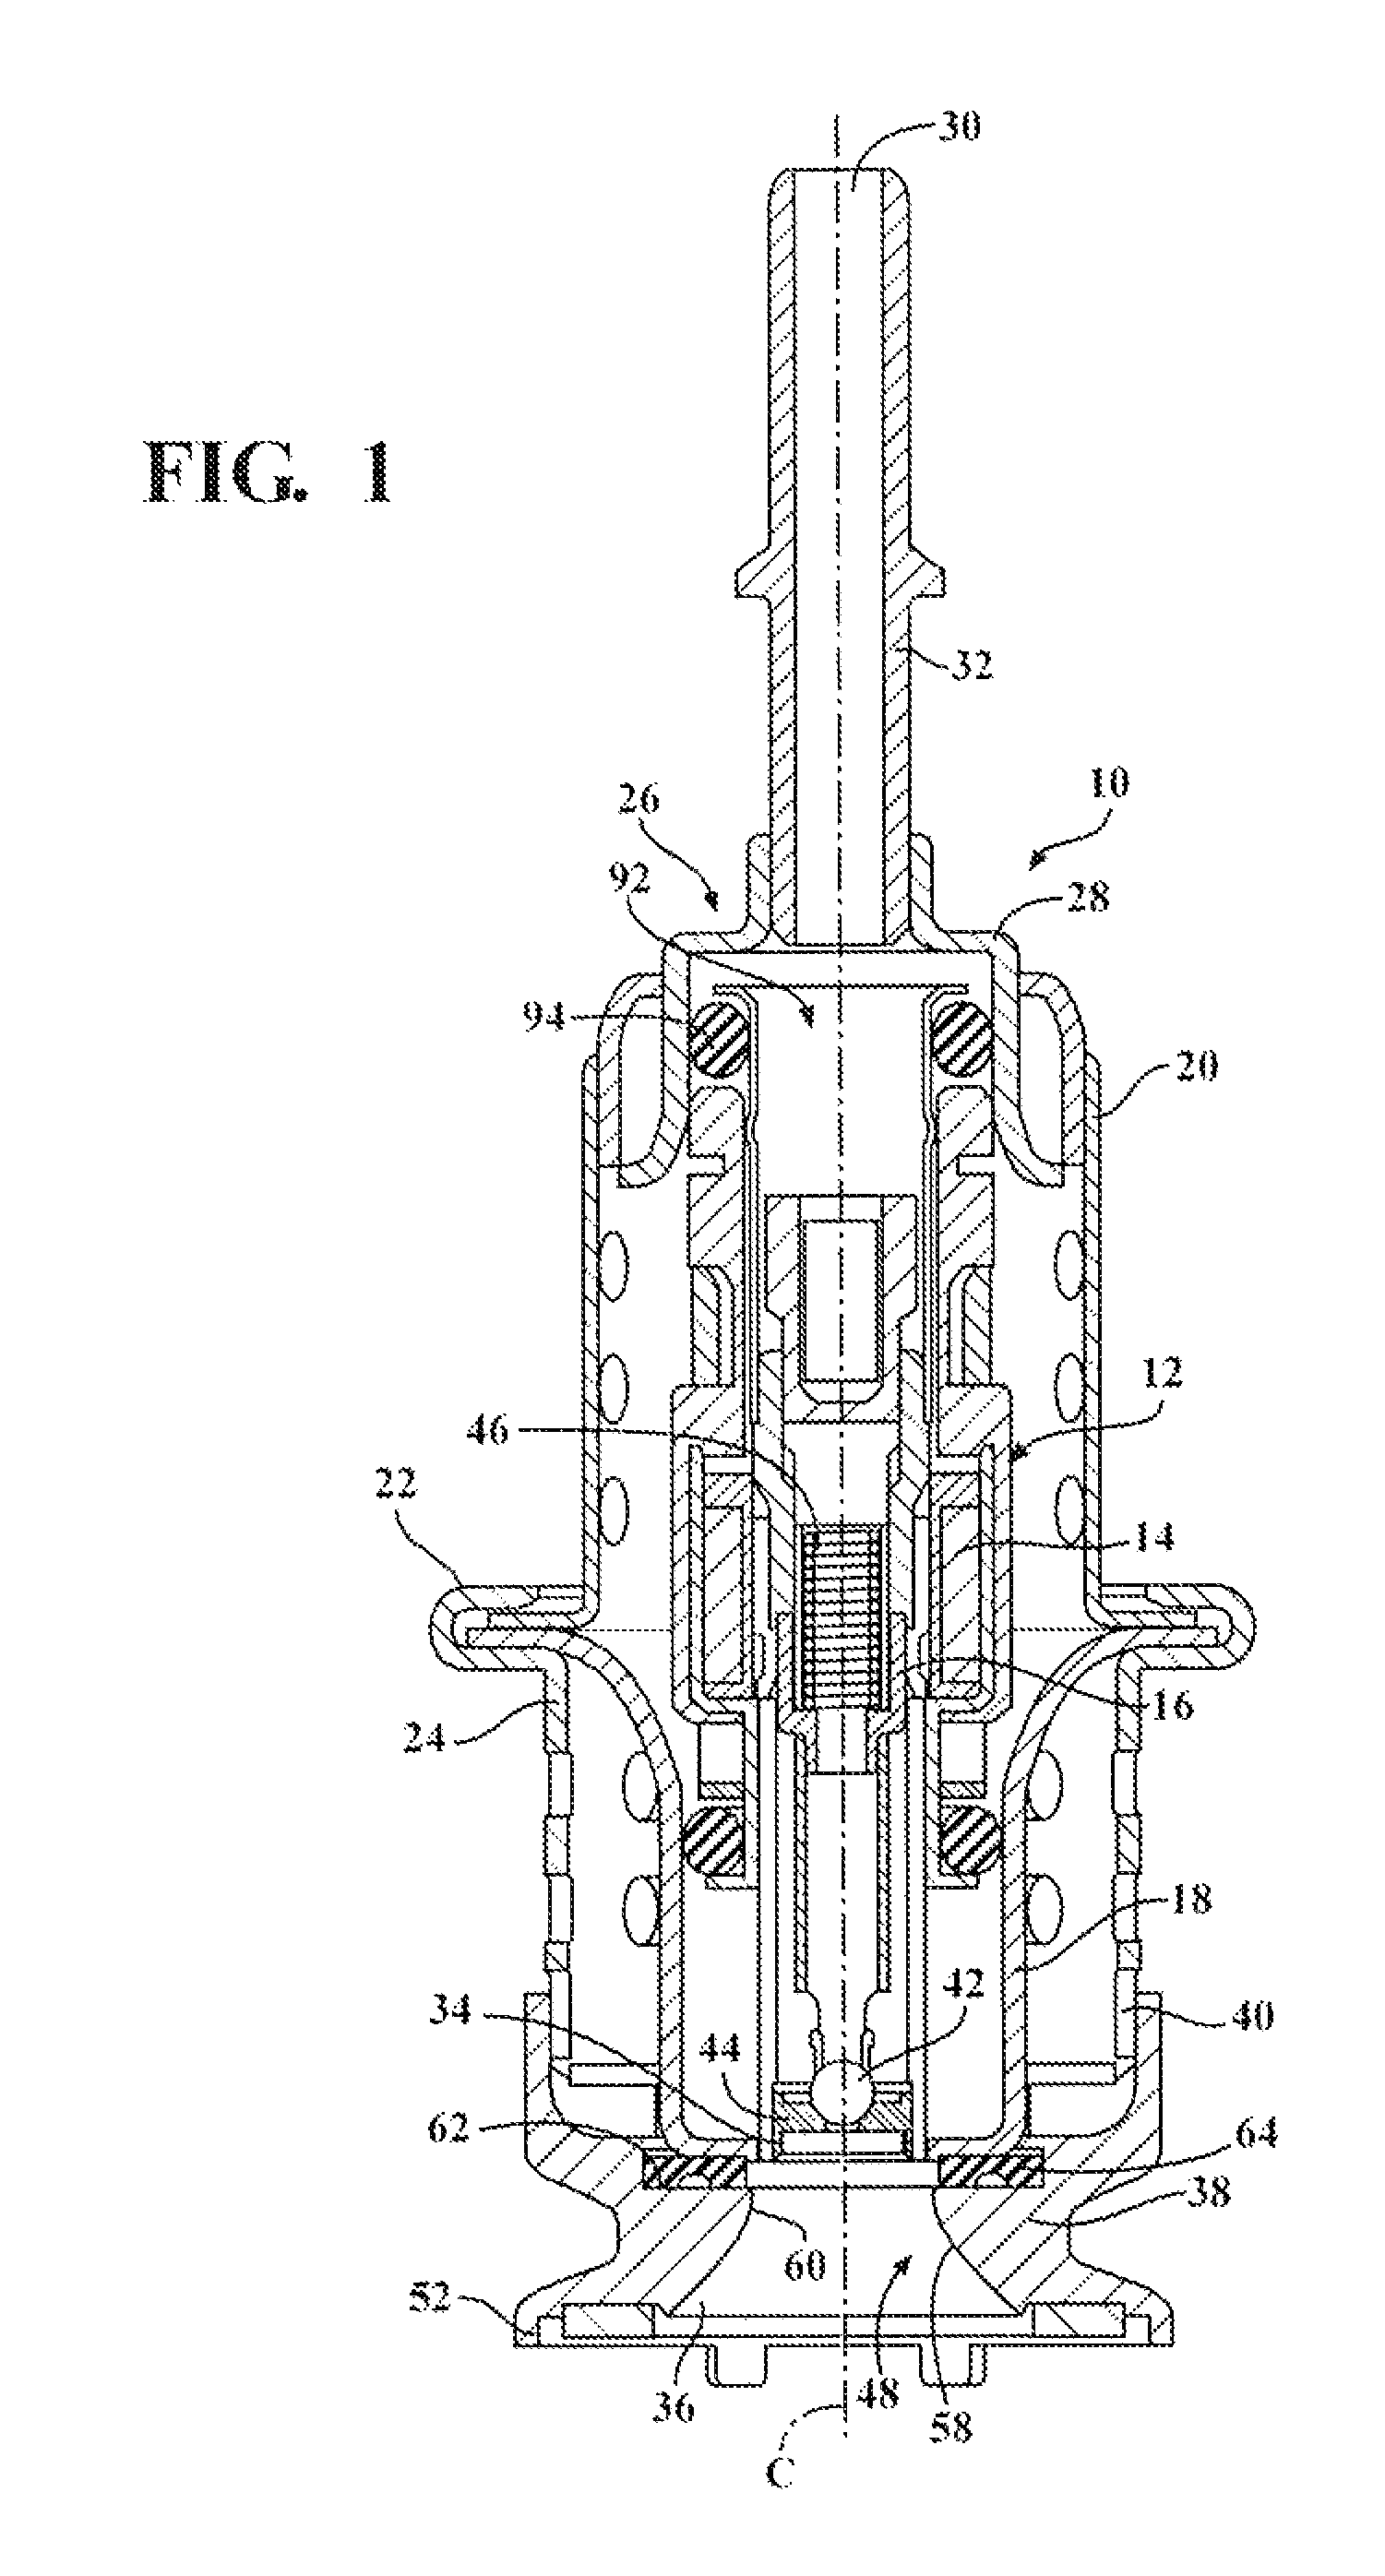 Purge system for reductant delivery unit for a selective catalytic reduction system